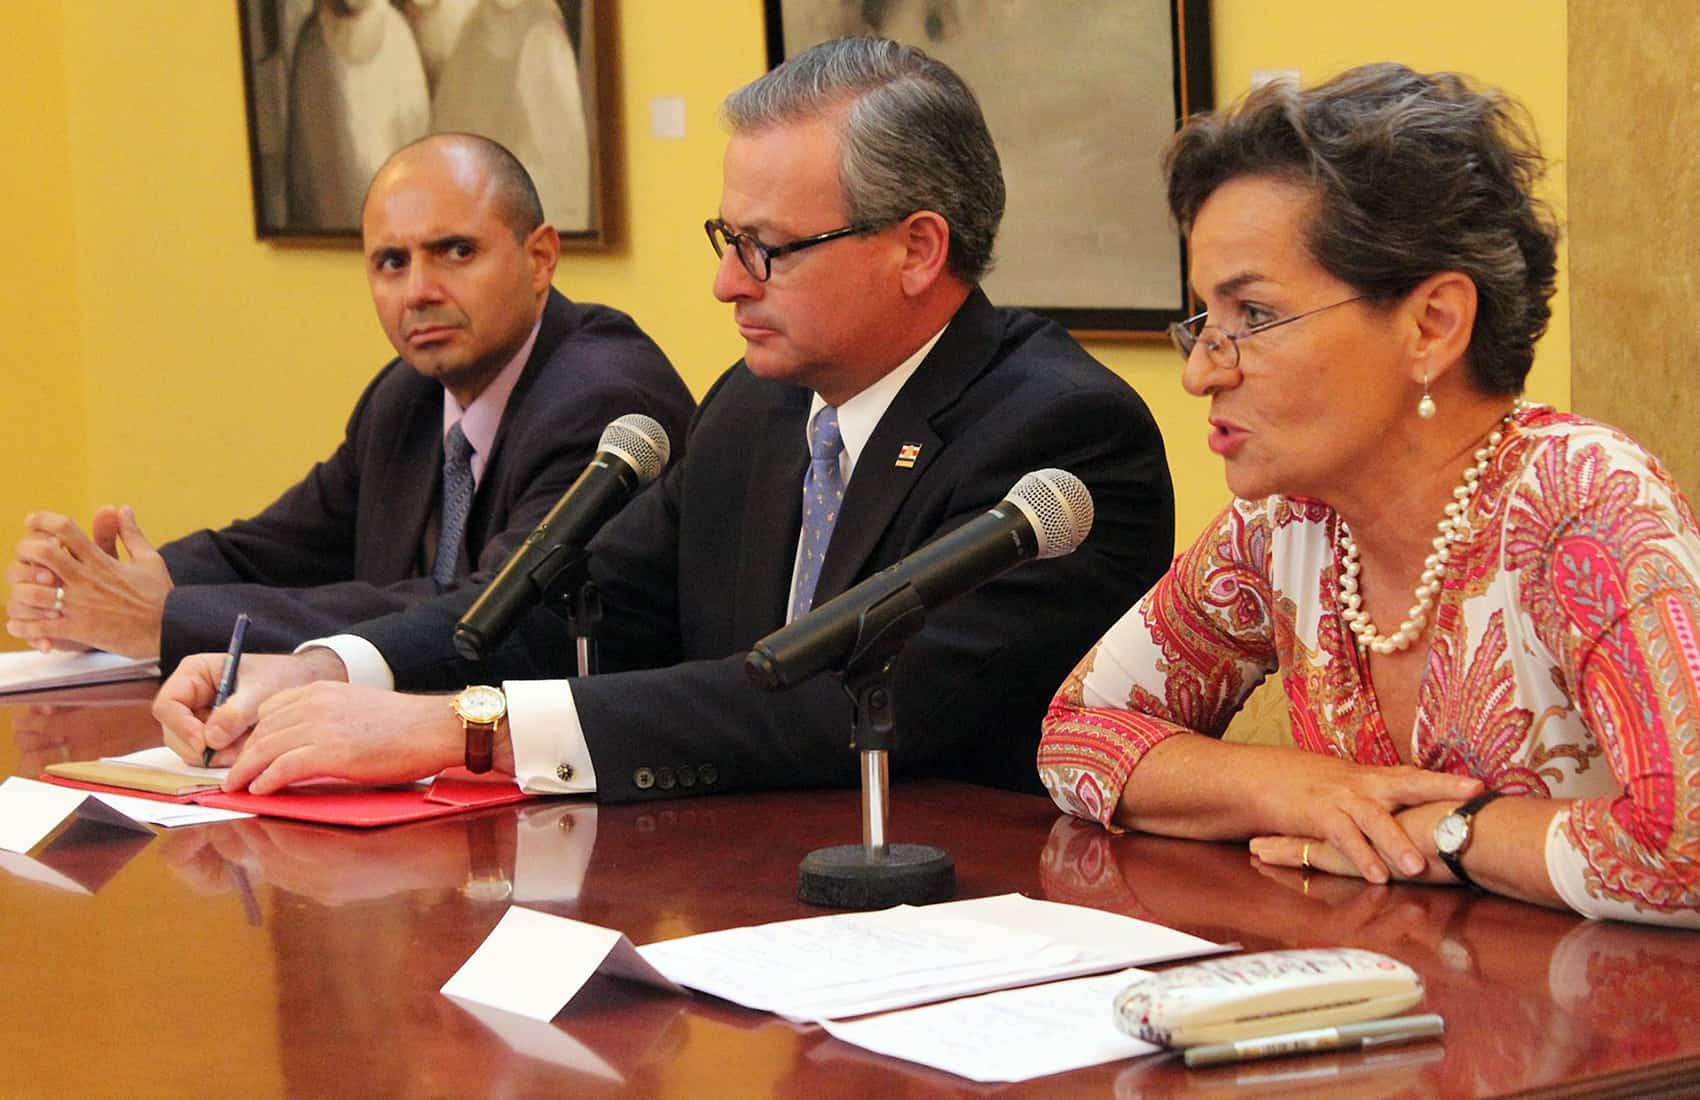 Christiana Figueres at the Foreign Ministry. Sept. 12, 2016.